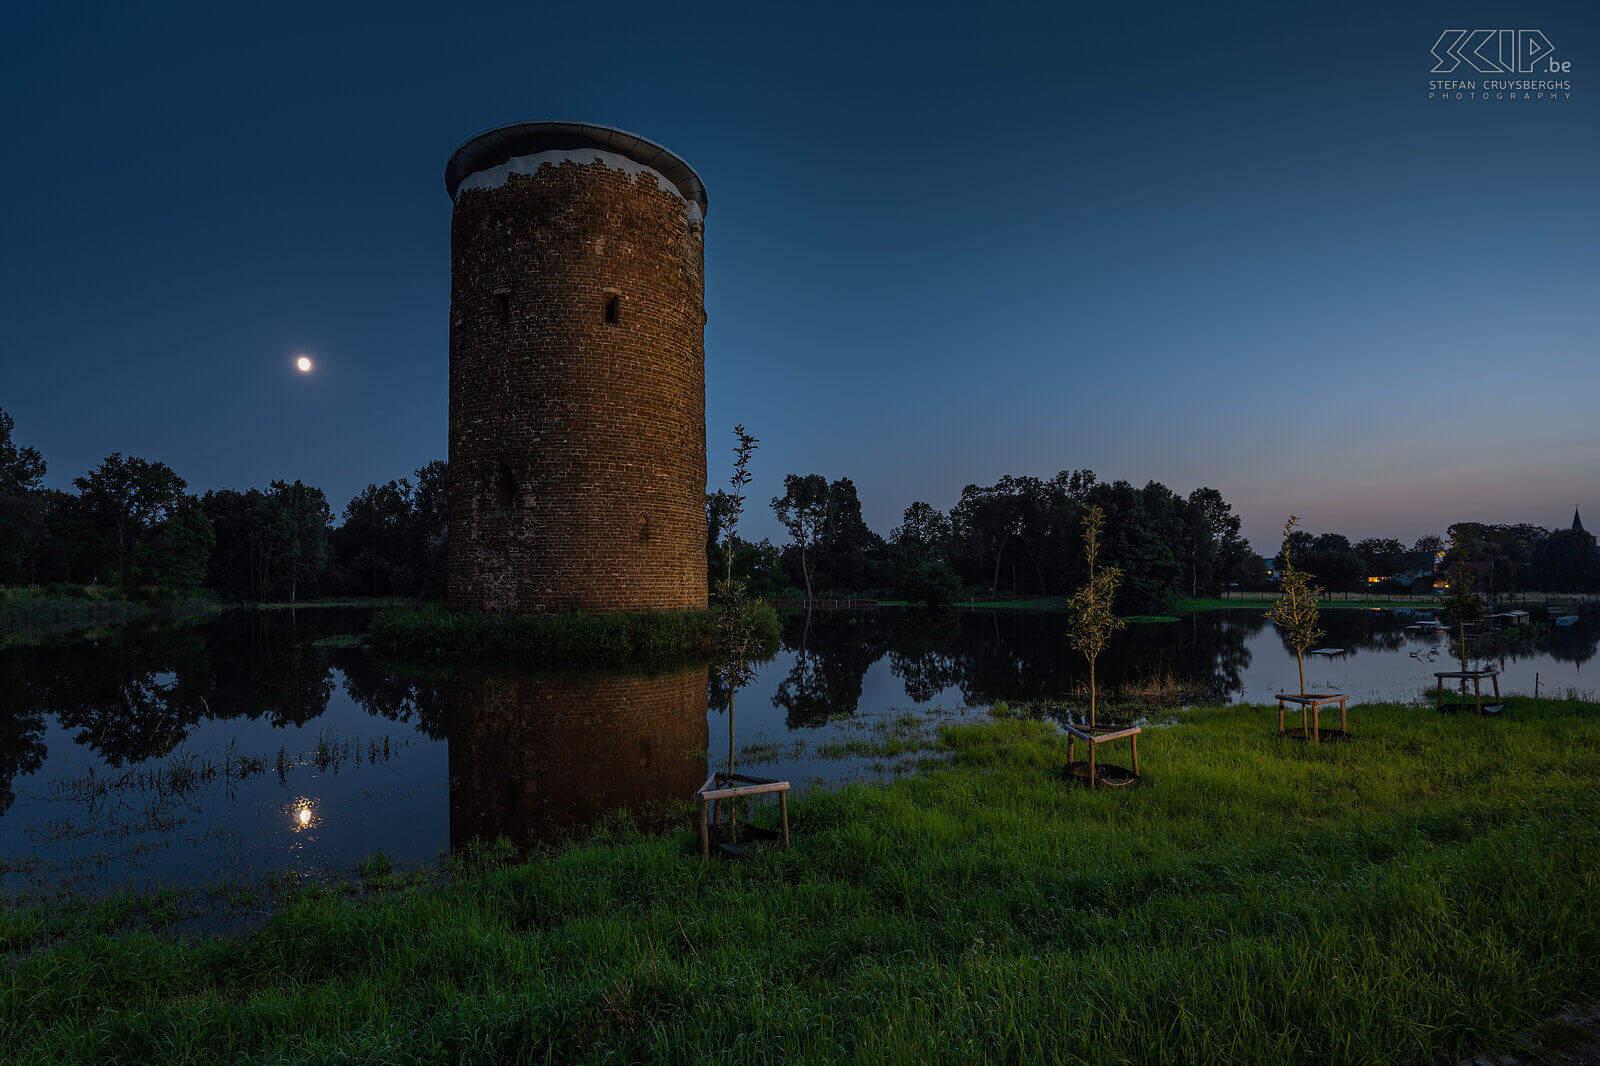 Hageland by night - Maiden's tower in Zichem In the summer of 2021 the Demer river overflowed its banks and the Maiden tower in Zichem stood in the water which resulted in a nice reflection with a full moon. This tower which was built in the 14th century and is located near the Demer river. In 2015 the tower was renovated and the surrounding location has been redeveloped a couple of years ago. Stefan Cruysberghs